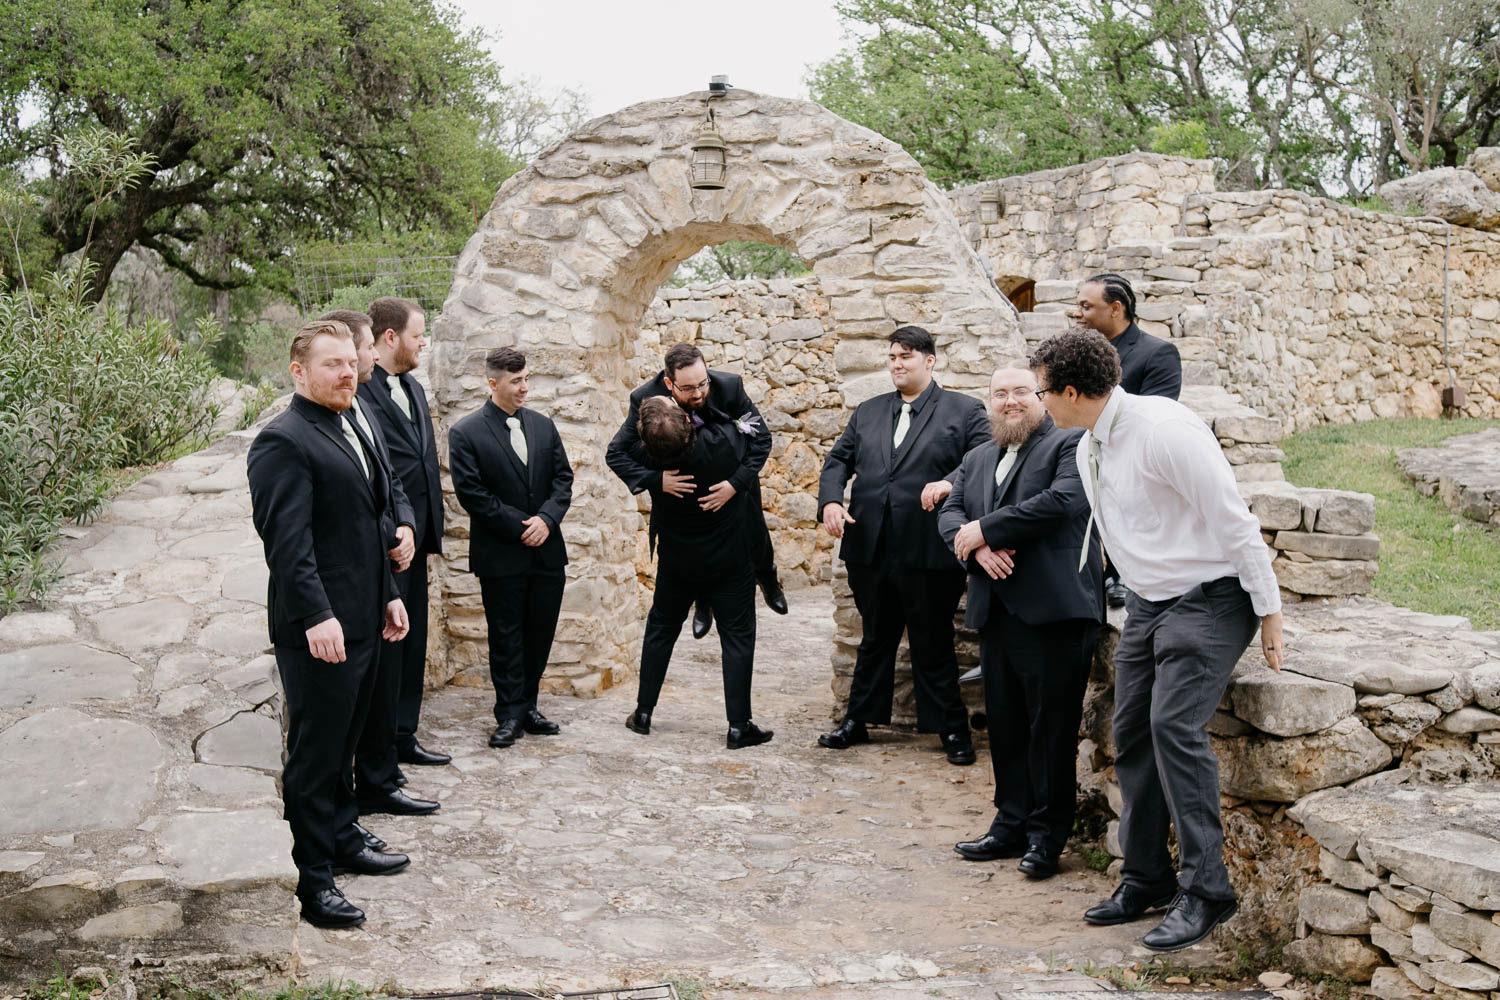 005 Eagle Dancer Ranch Boerne Hill Country Wedding+Reception Philip Thomas Photography